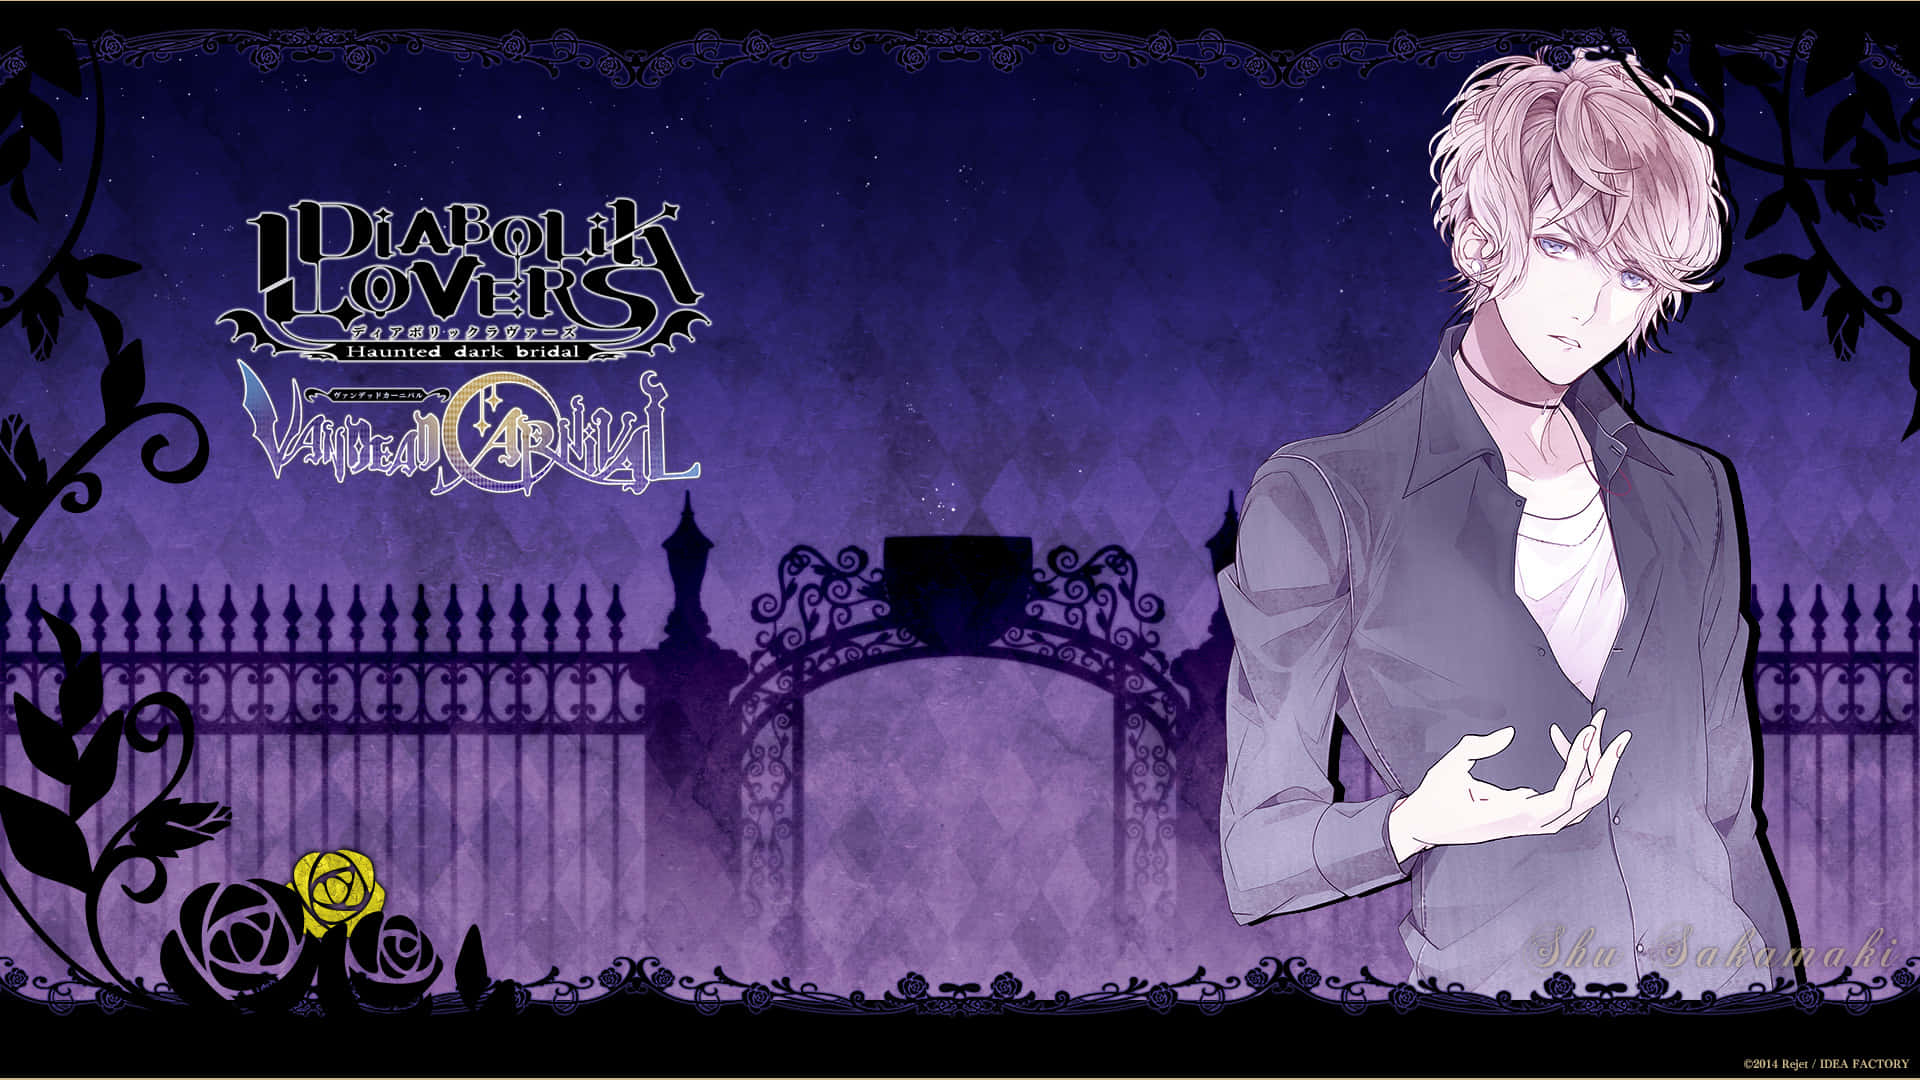 Join the dark and mysterious world of Diabolik Lovers